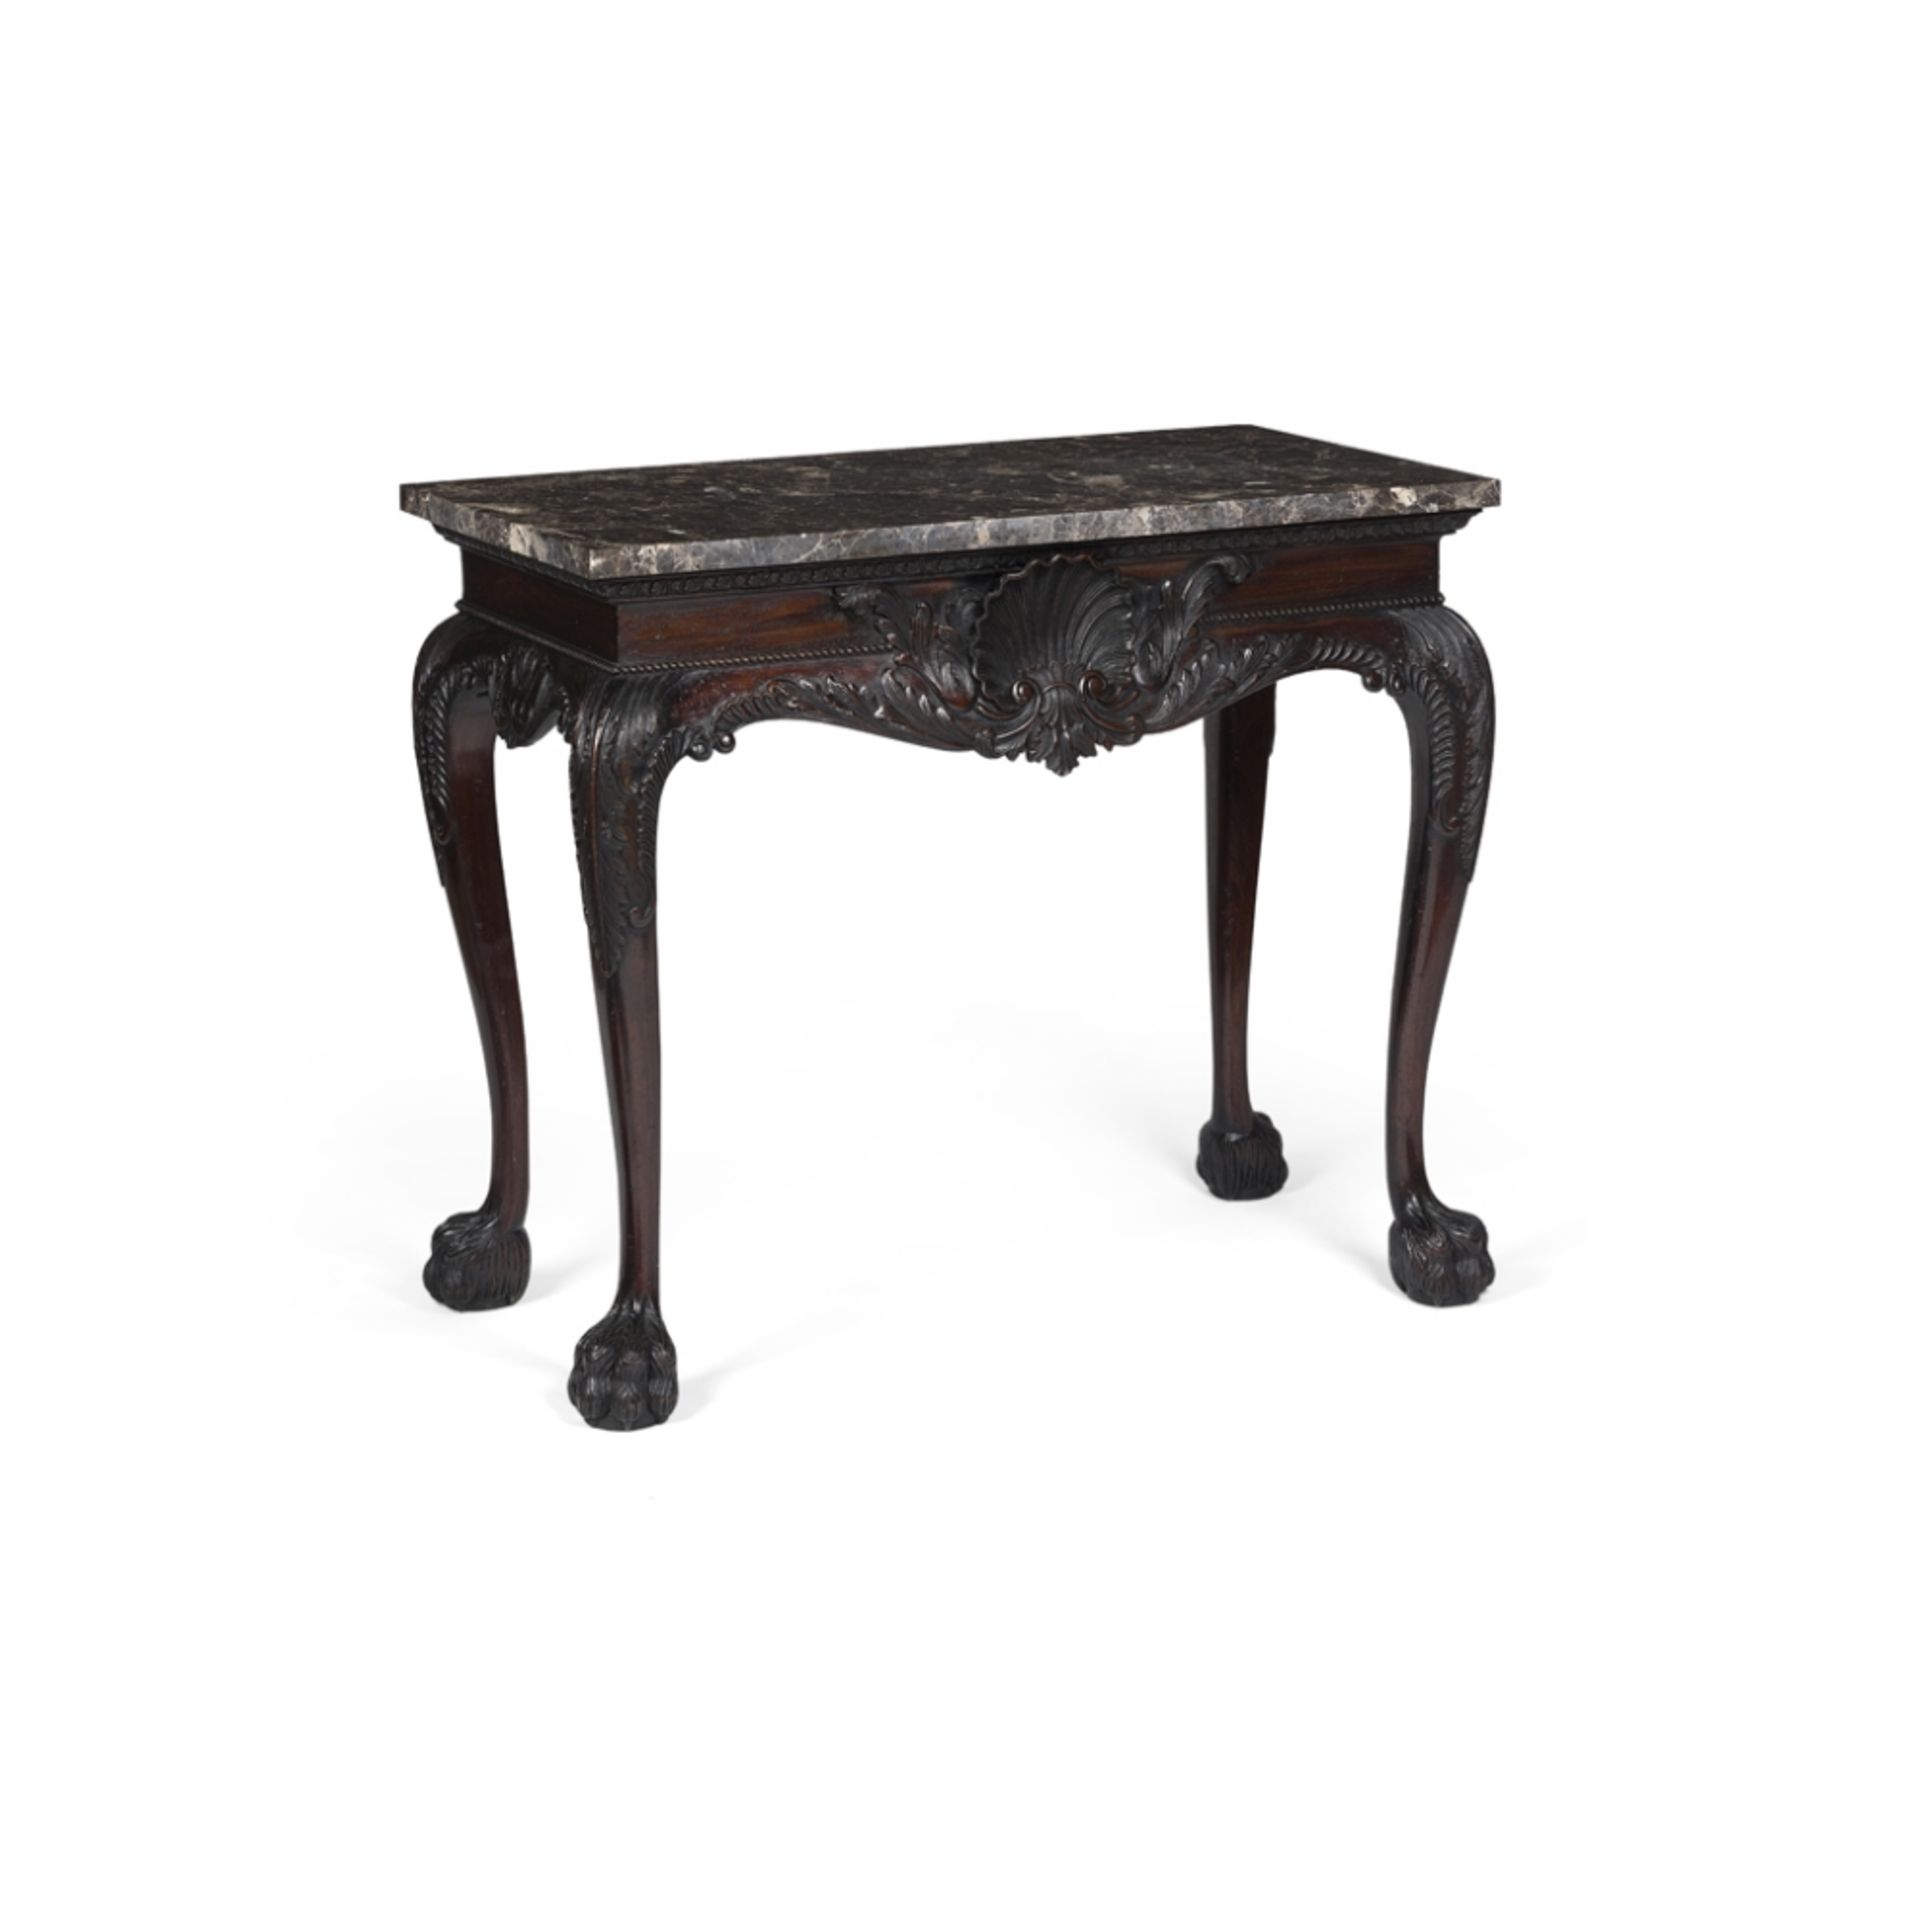 PAIR OF GEORGE II STYLE MAHOGANY MARBLE TOP SIDE TABLES, IN THE MANNER OF HICKS OF DUBLINMODERN - Image 2 of 3